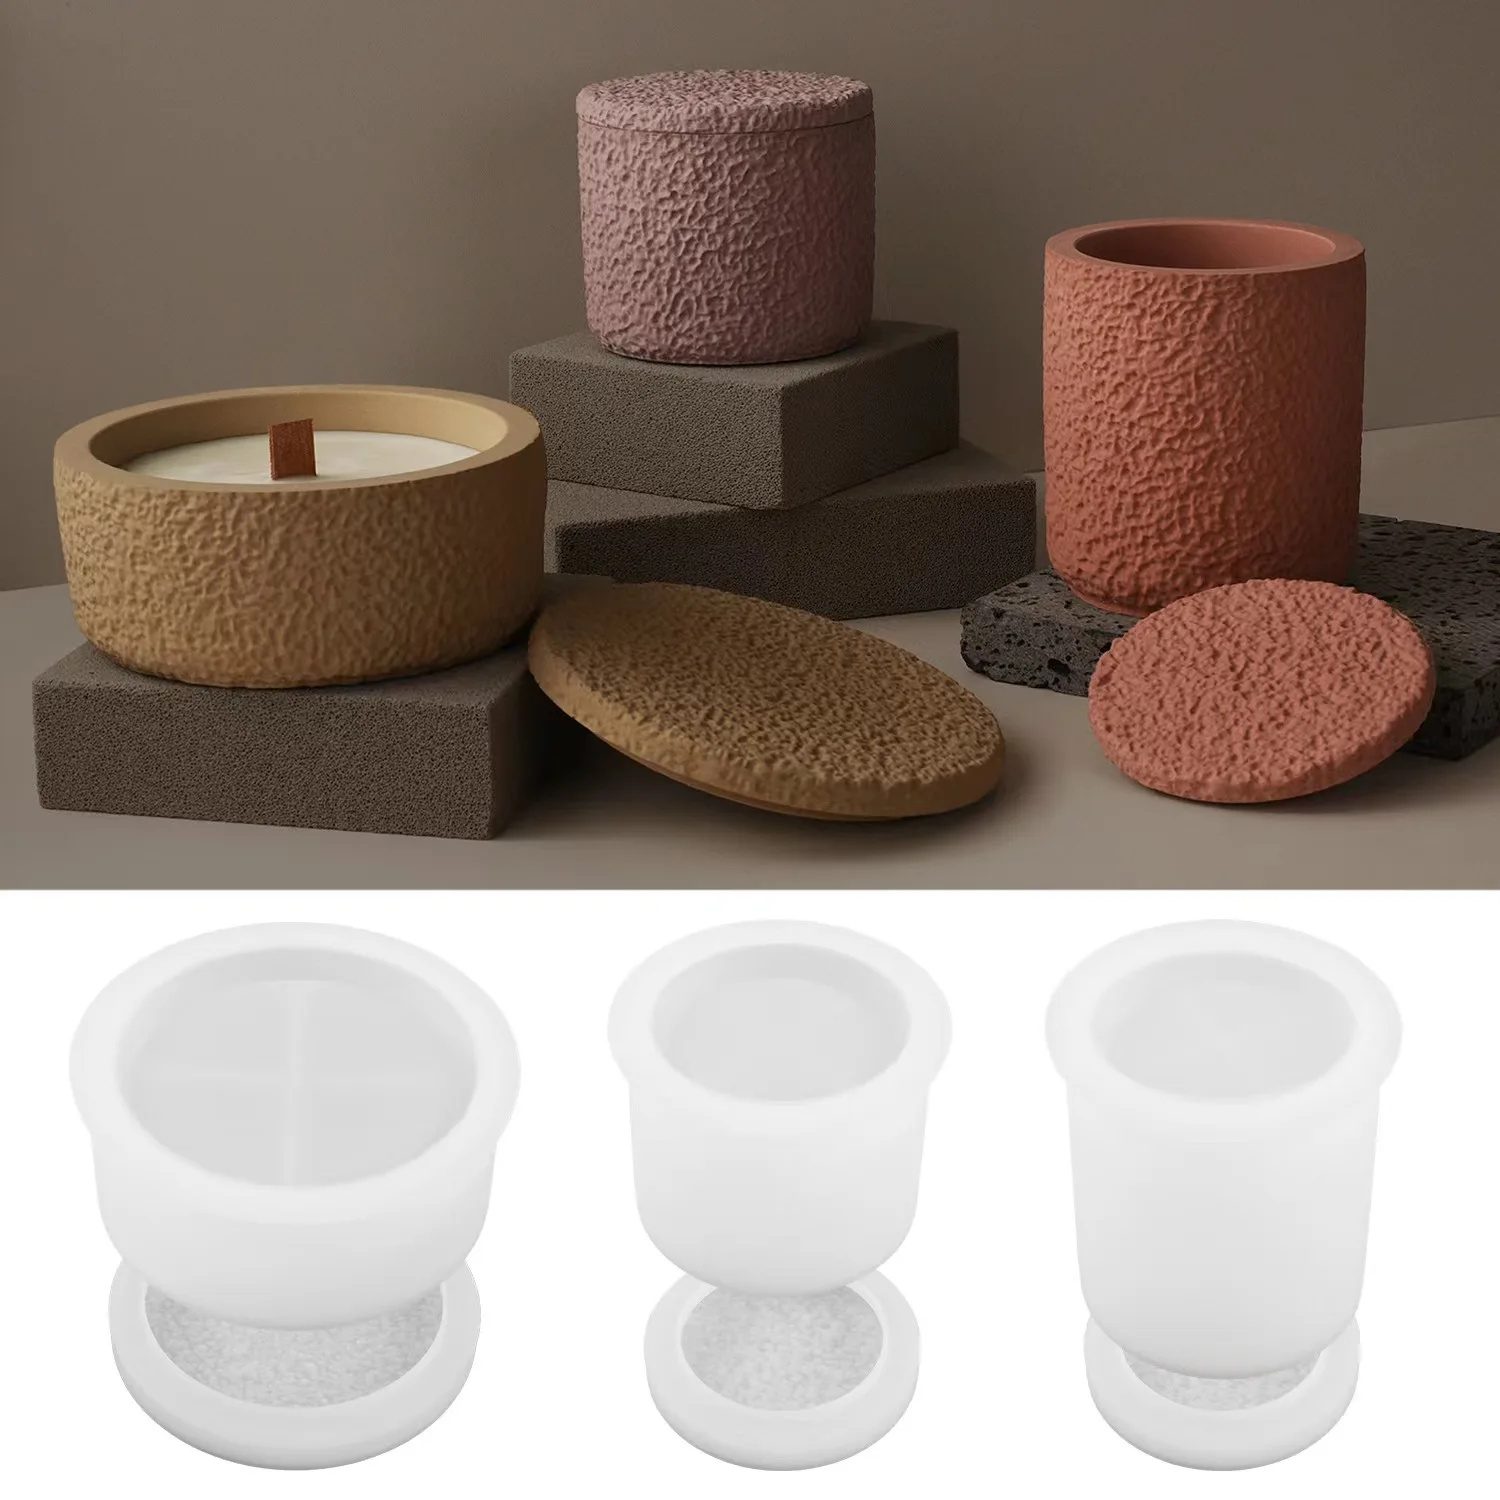 

Round Candle Cup Silicone Mold DIY Epoxy Resin Cement Gypsum Aromatherapy Candle Jar Storage Box Mold Home Decoration Crafts